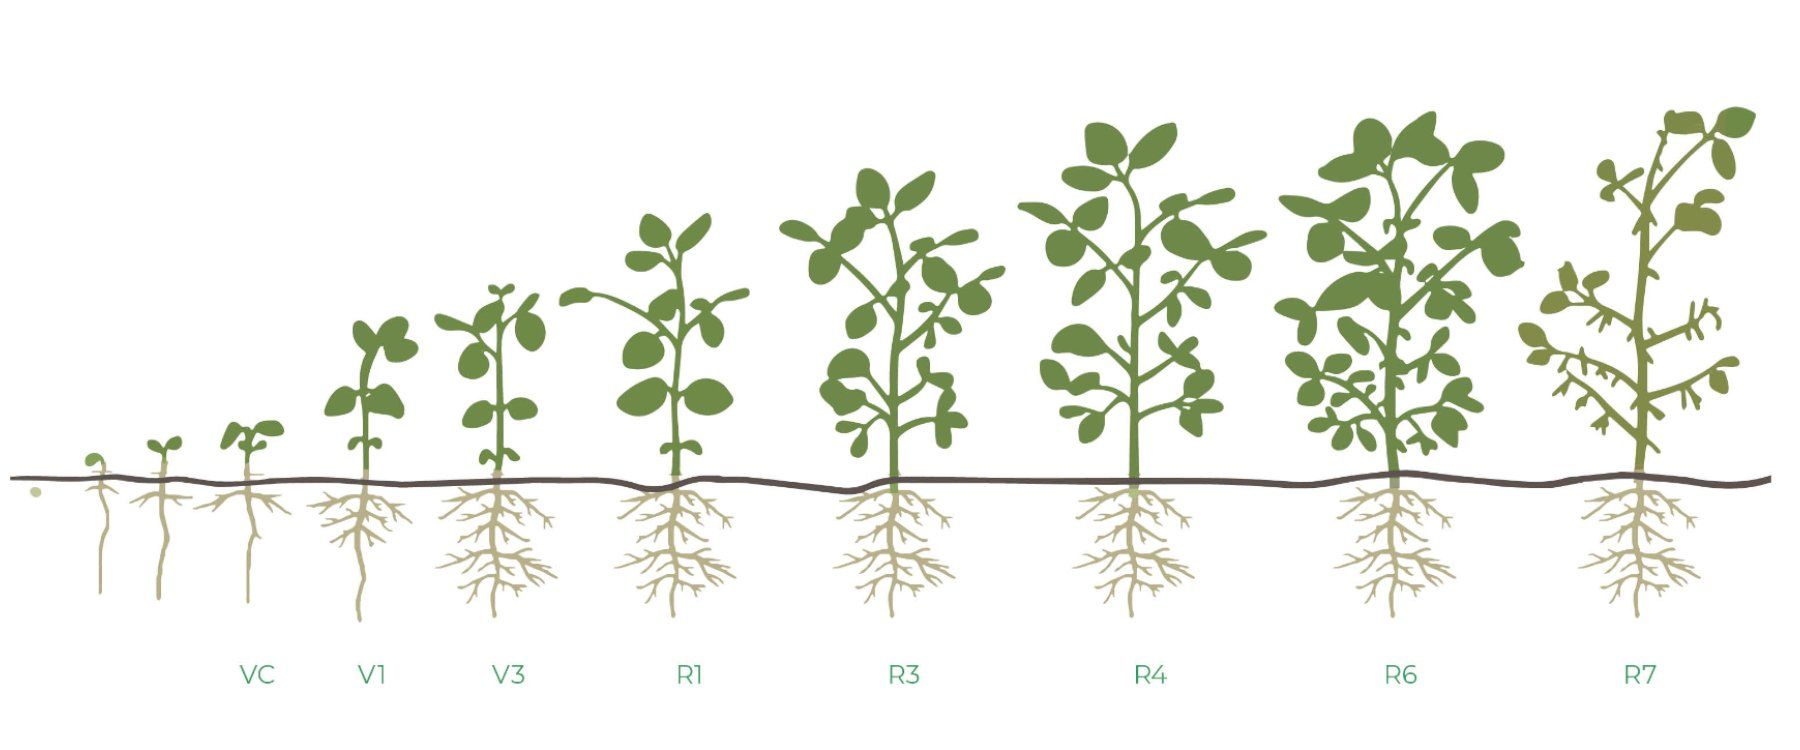 Soybean Stages of Growth